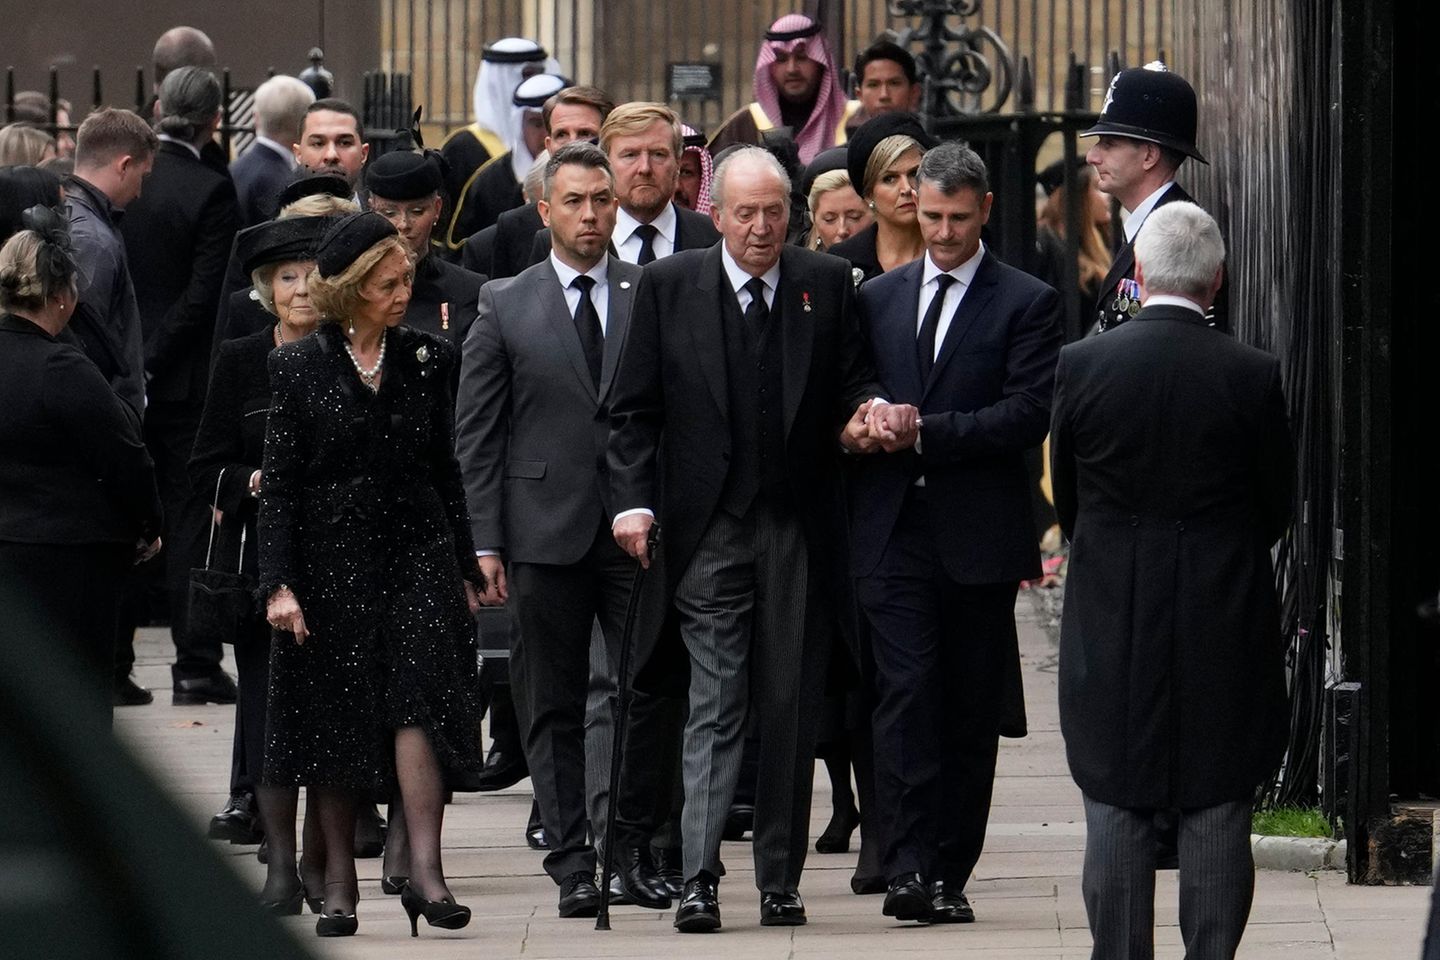 Former King of Spain Juan Carlos with his wife Sofia at the funeral of Queen Elizabeth, † 96